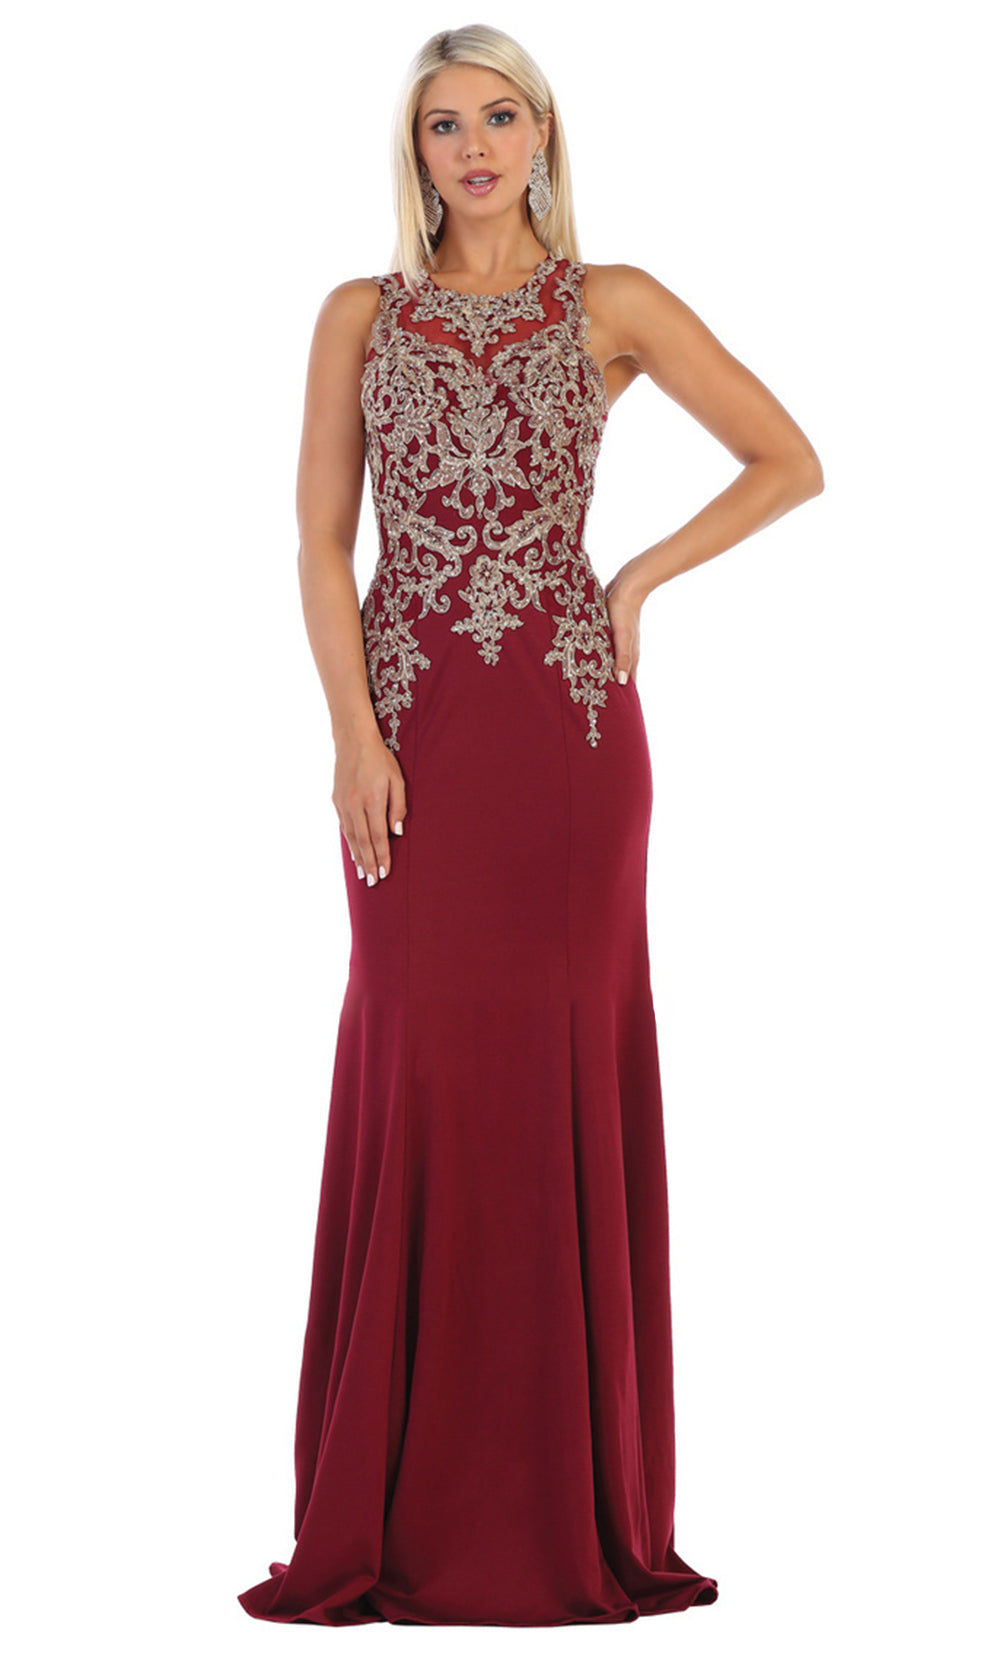 May Queen - MQ1629 Beaded Illusion Jewel Dress In Red